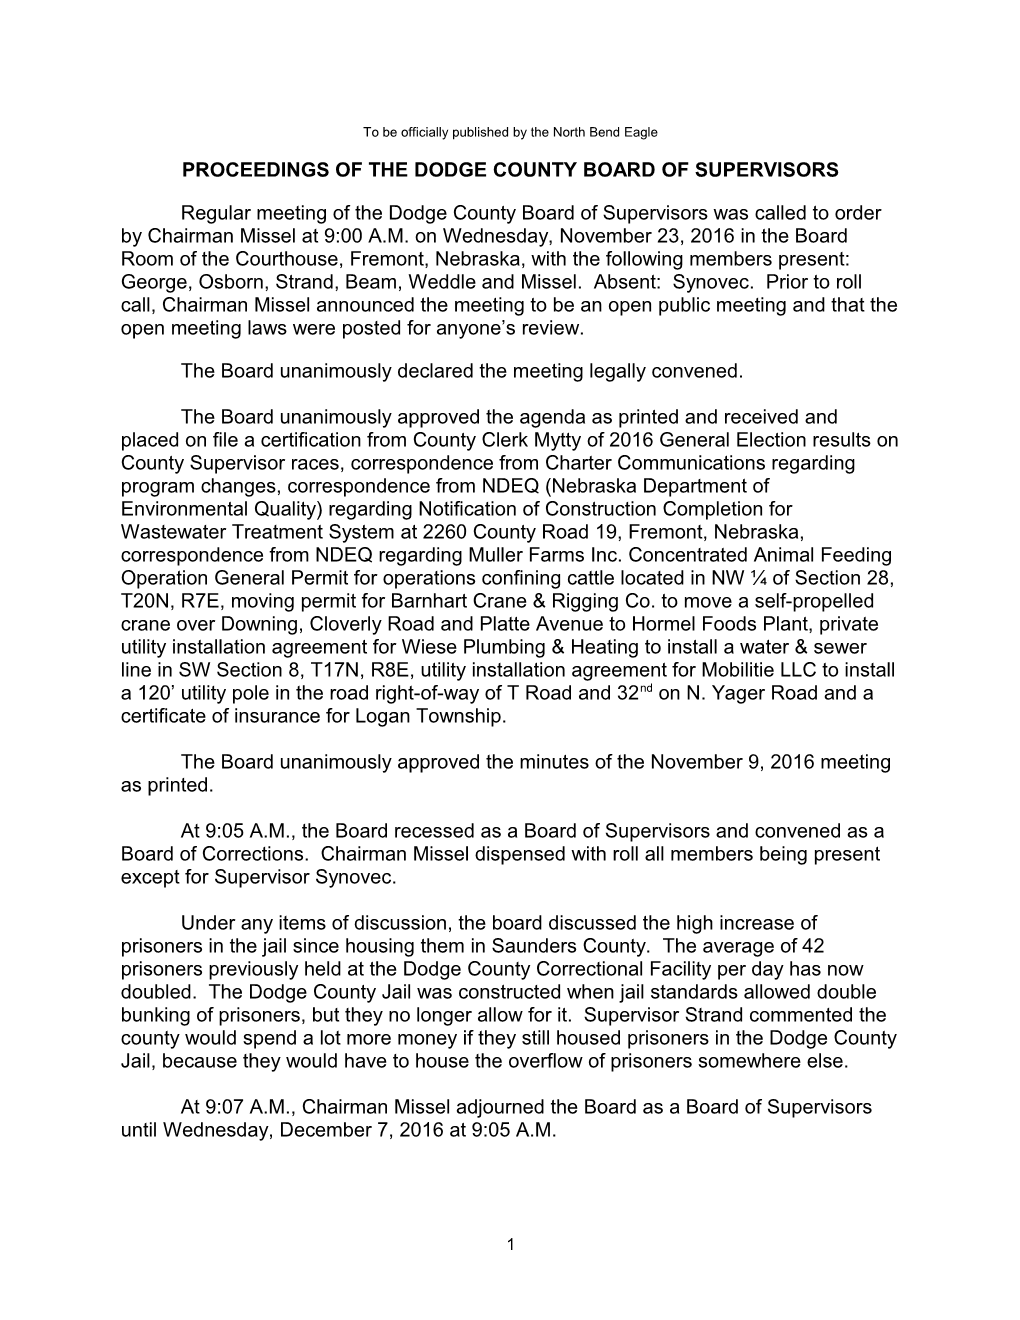 Proceedings of the Dodge County Board of Supervisors